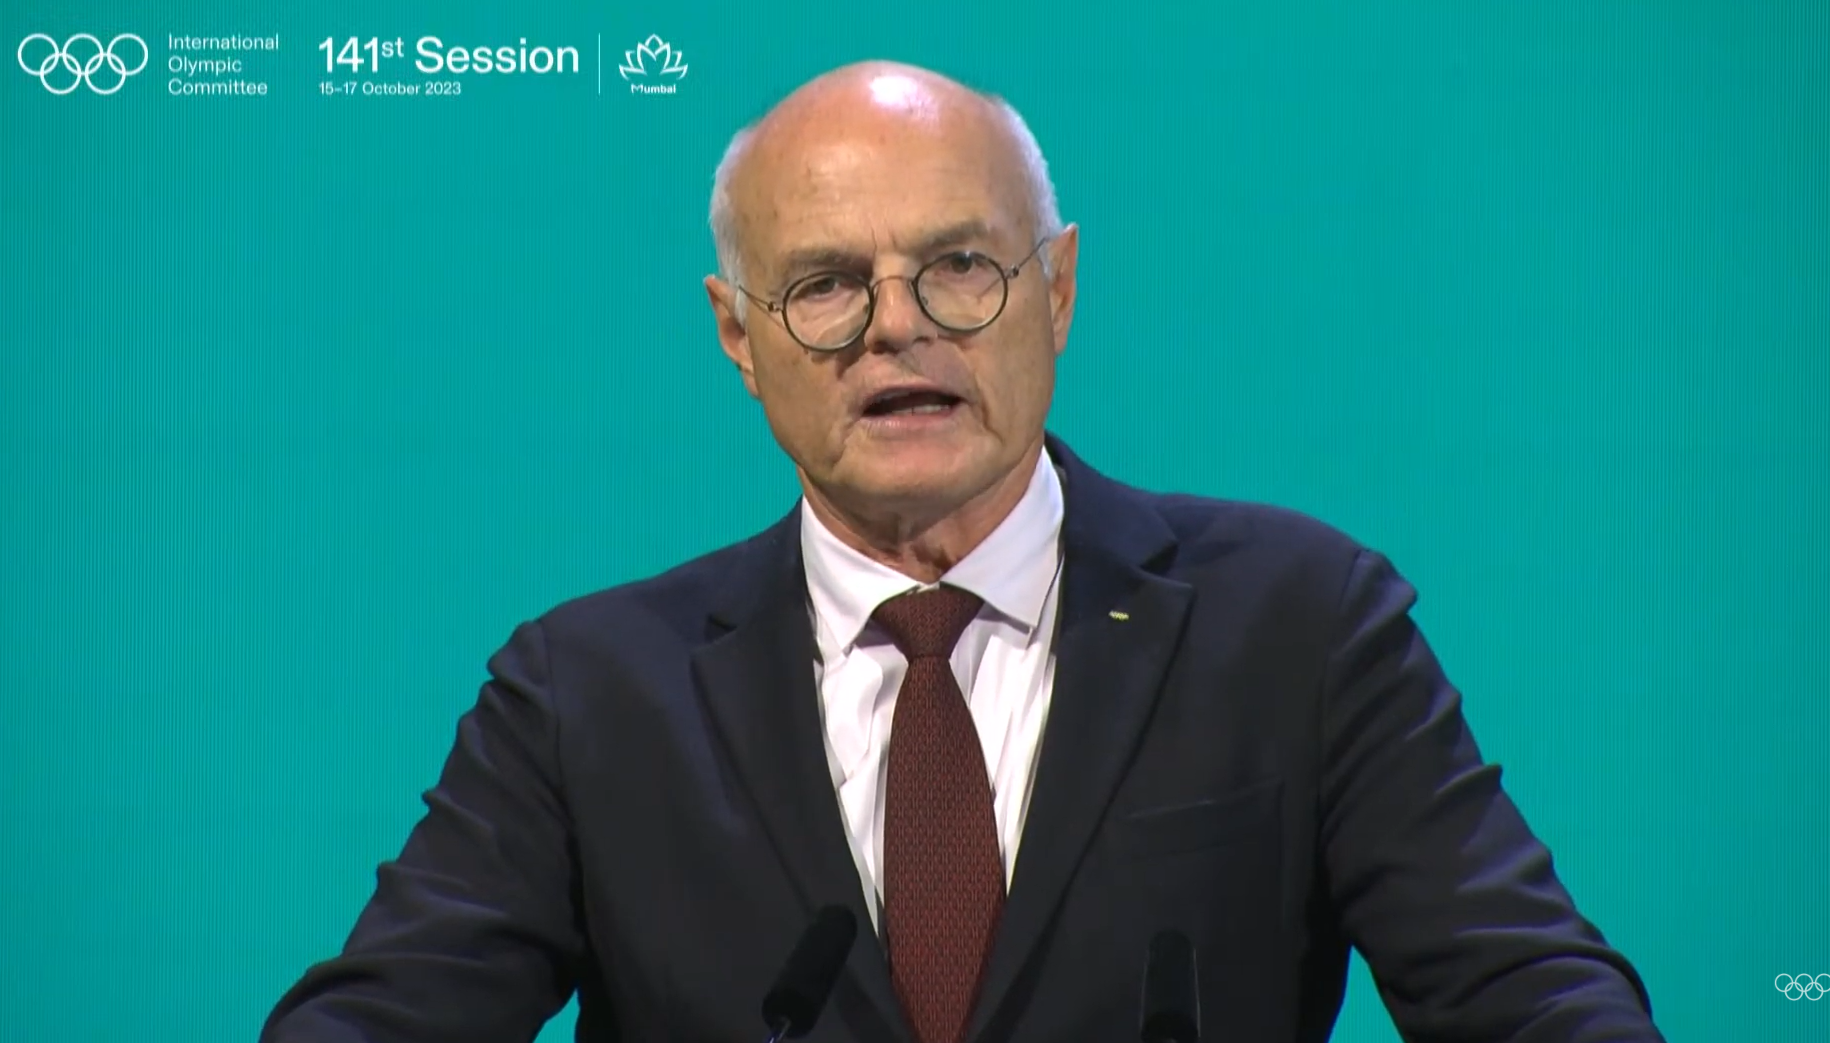 IOC Future Host Commission chair Karl Stoss claimed the double award would provide 